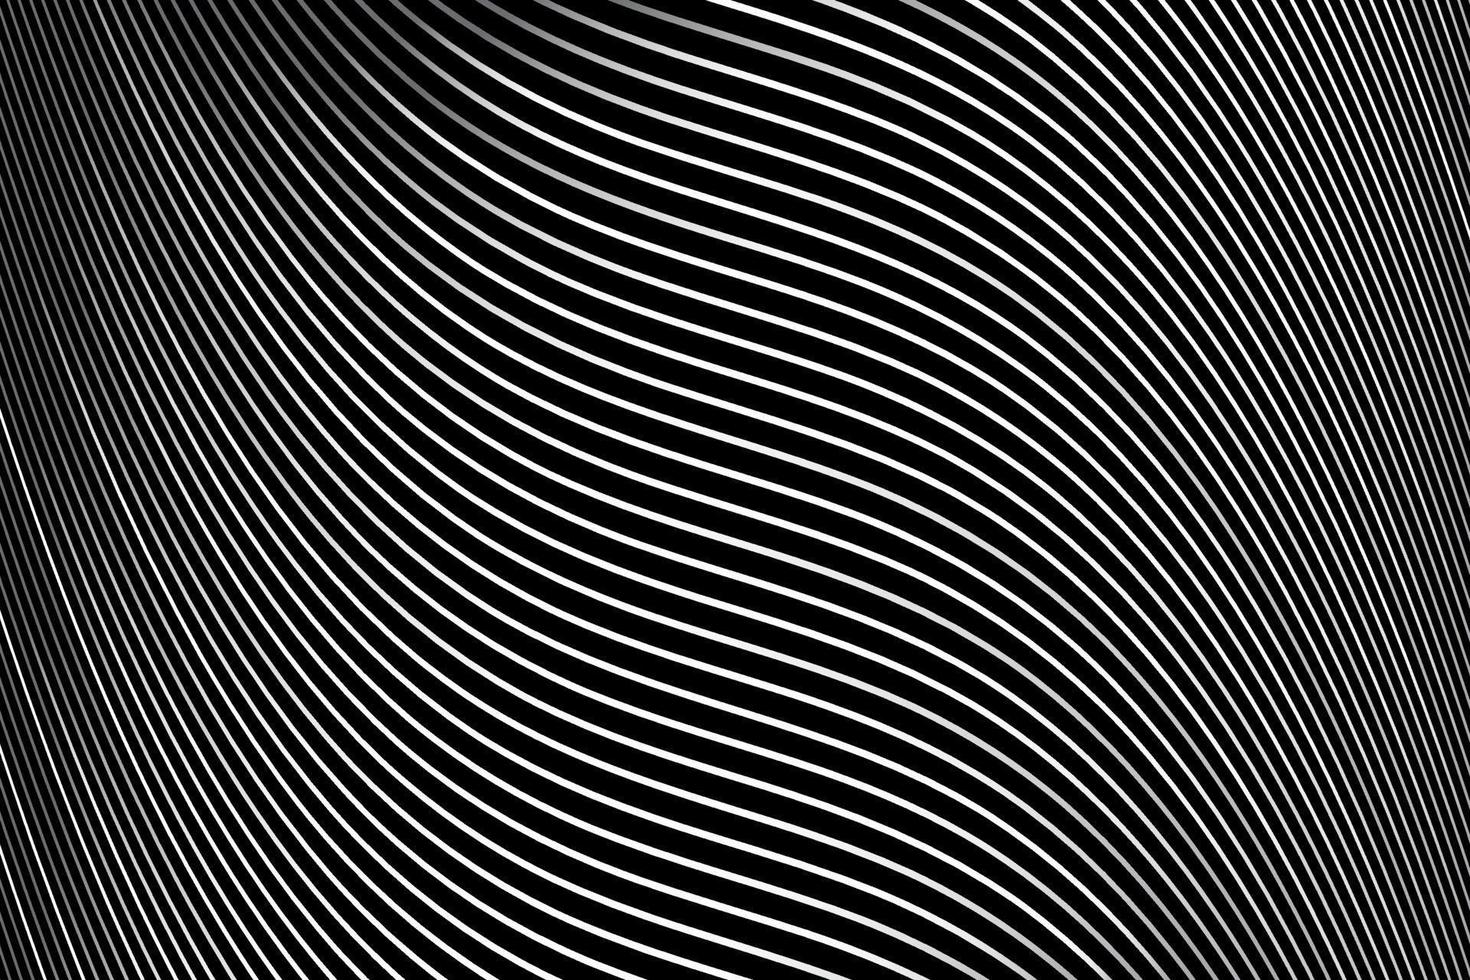 Abstract warped Diagonal Striped Background. Vector curved twisted slanting, waved lines texture.